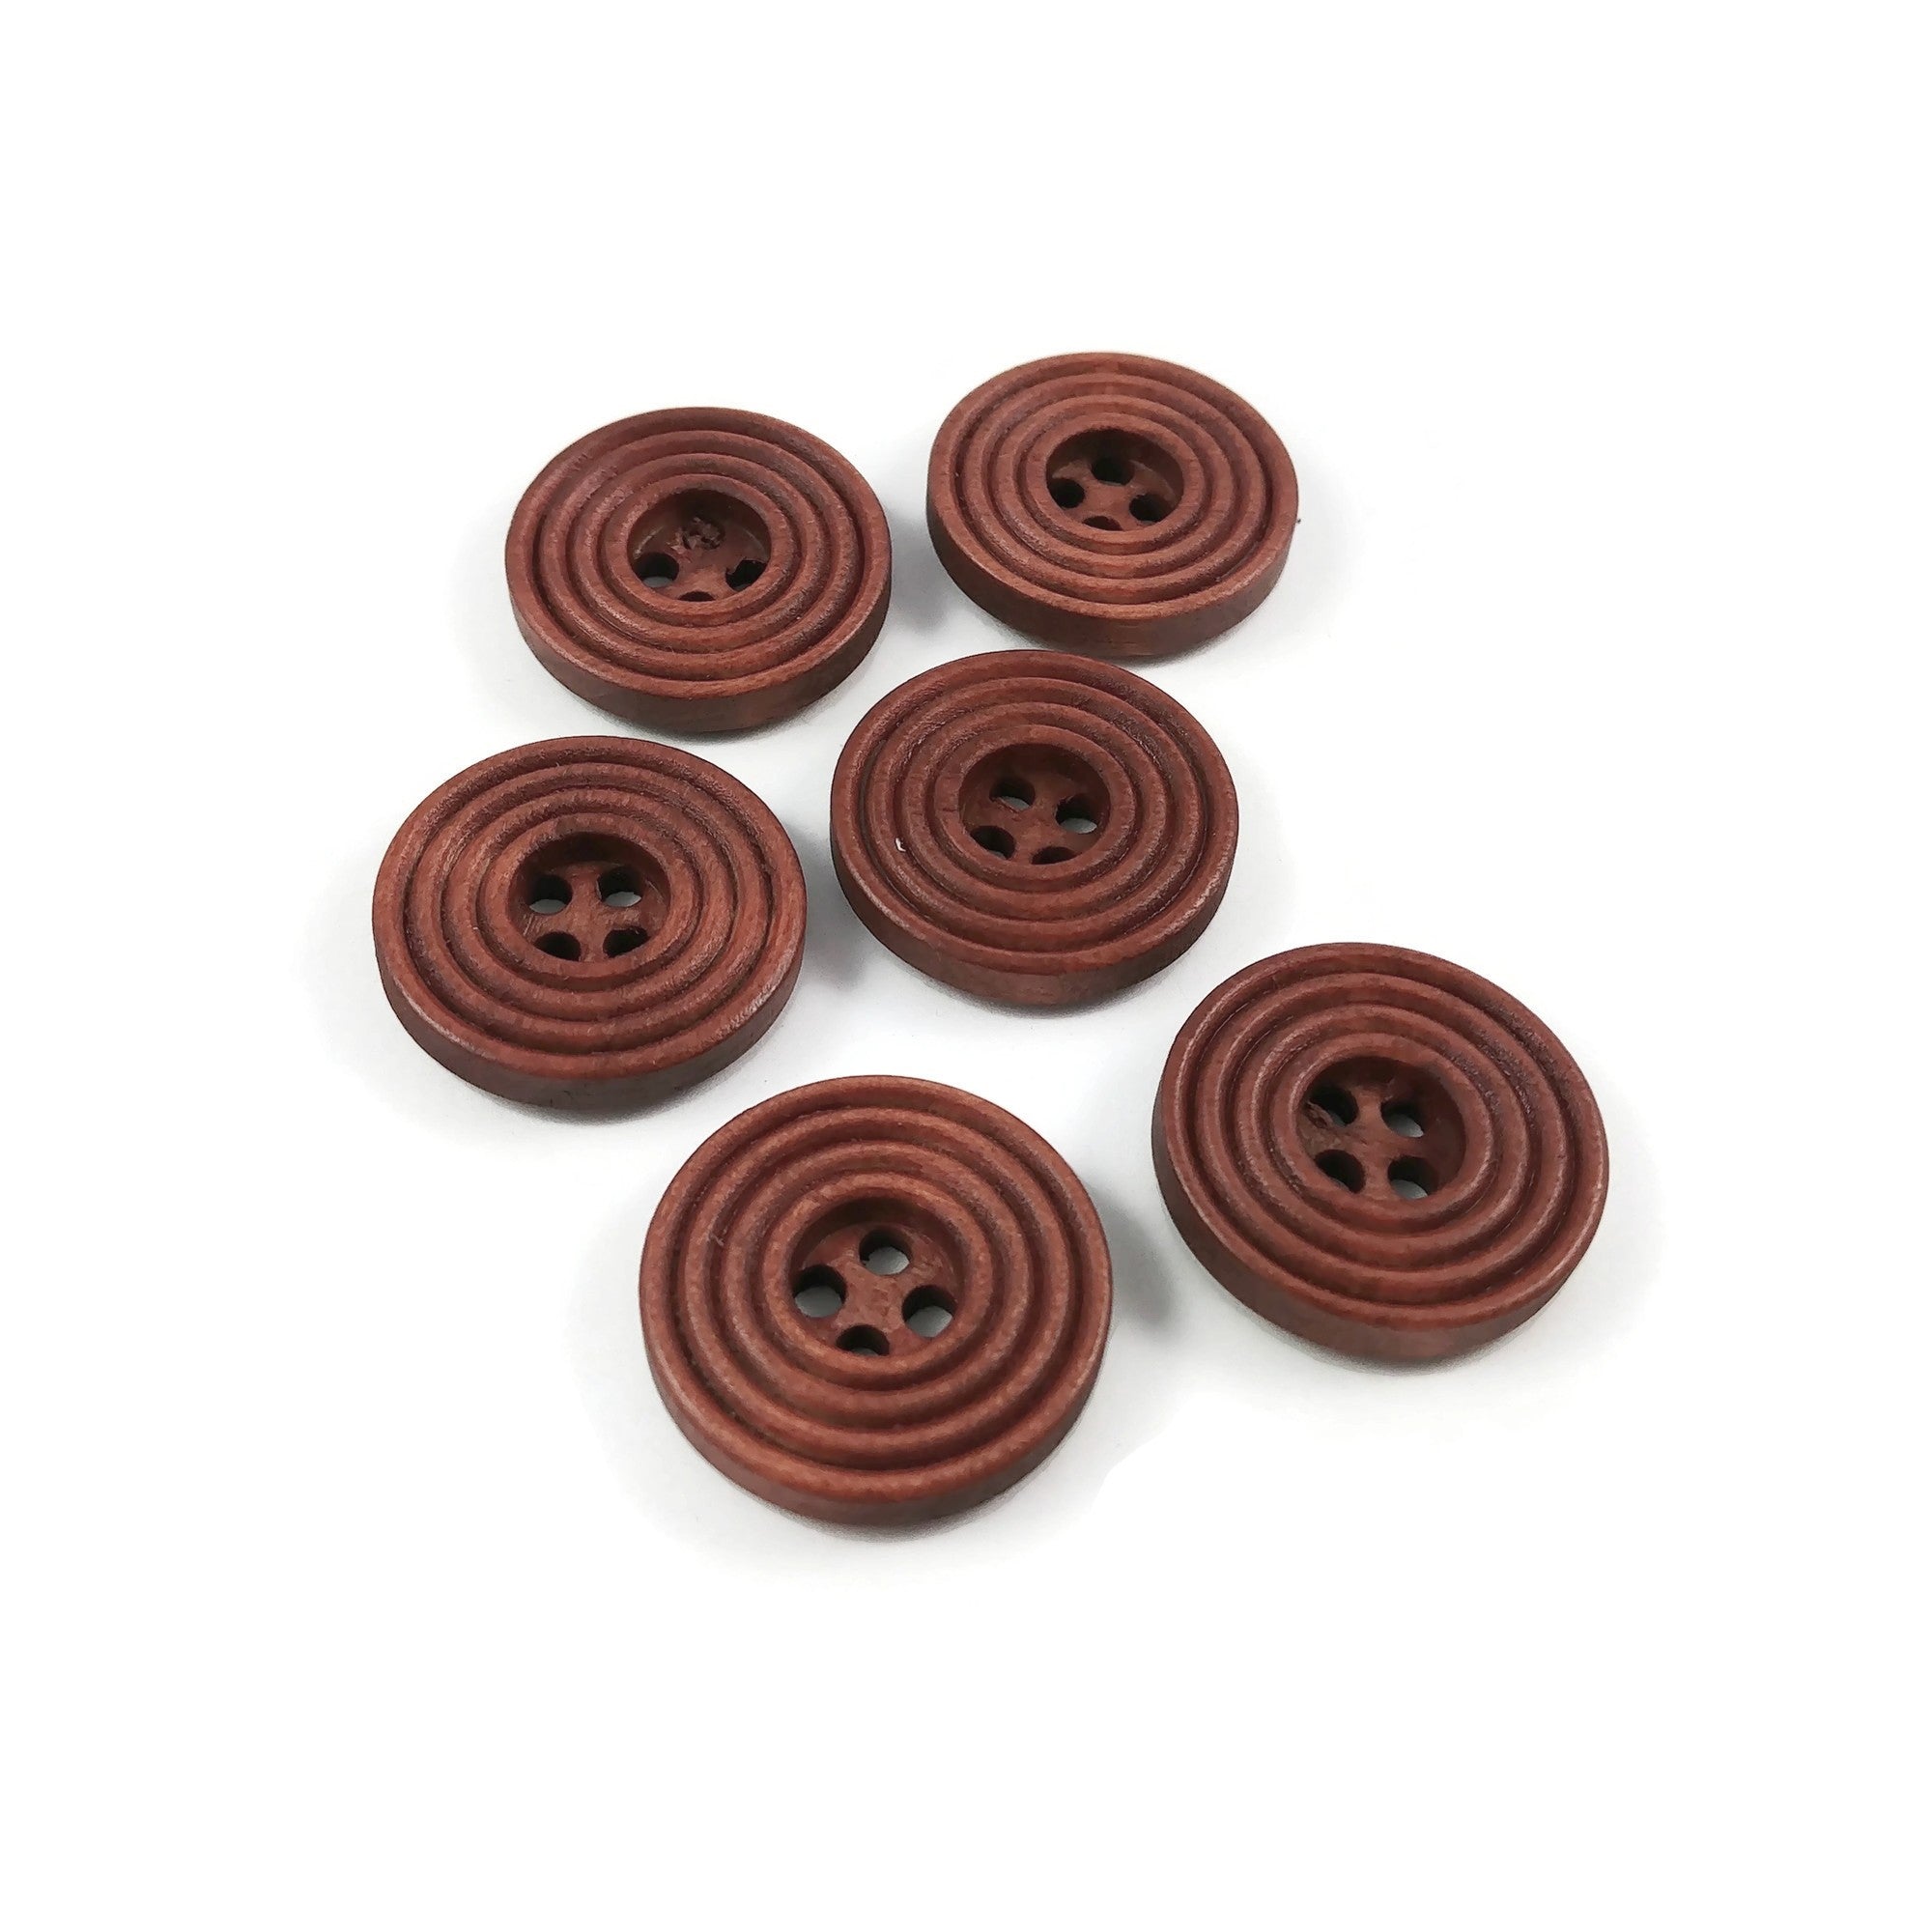 Esoca 200pcs Wood Craft Buttons 20mm Bulk Wooden Buttons for Crafts Vintage Button for Sewing